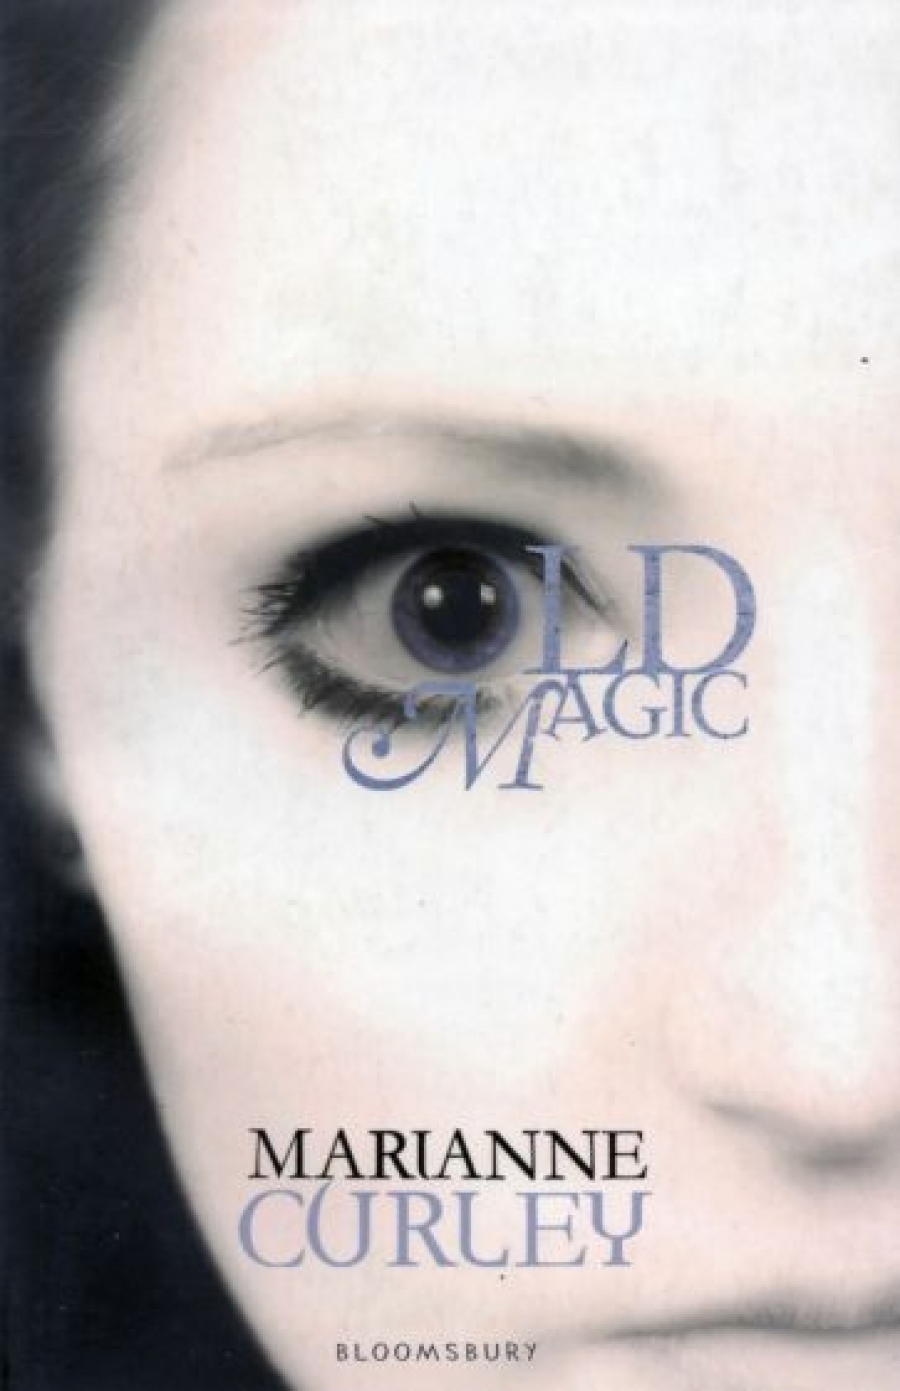 Marianne, Curley Old magic 